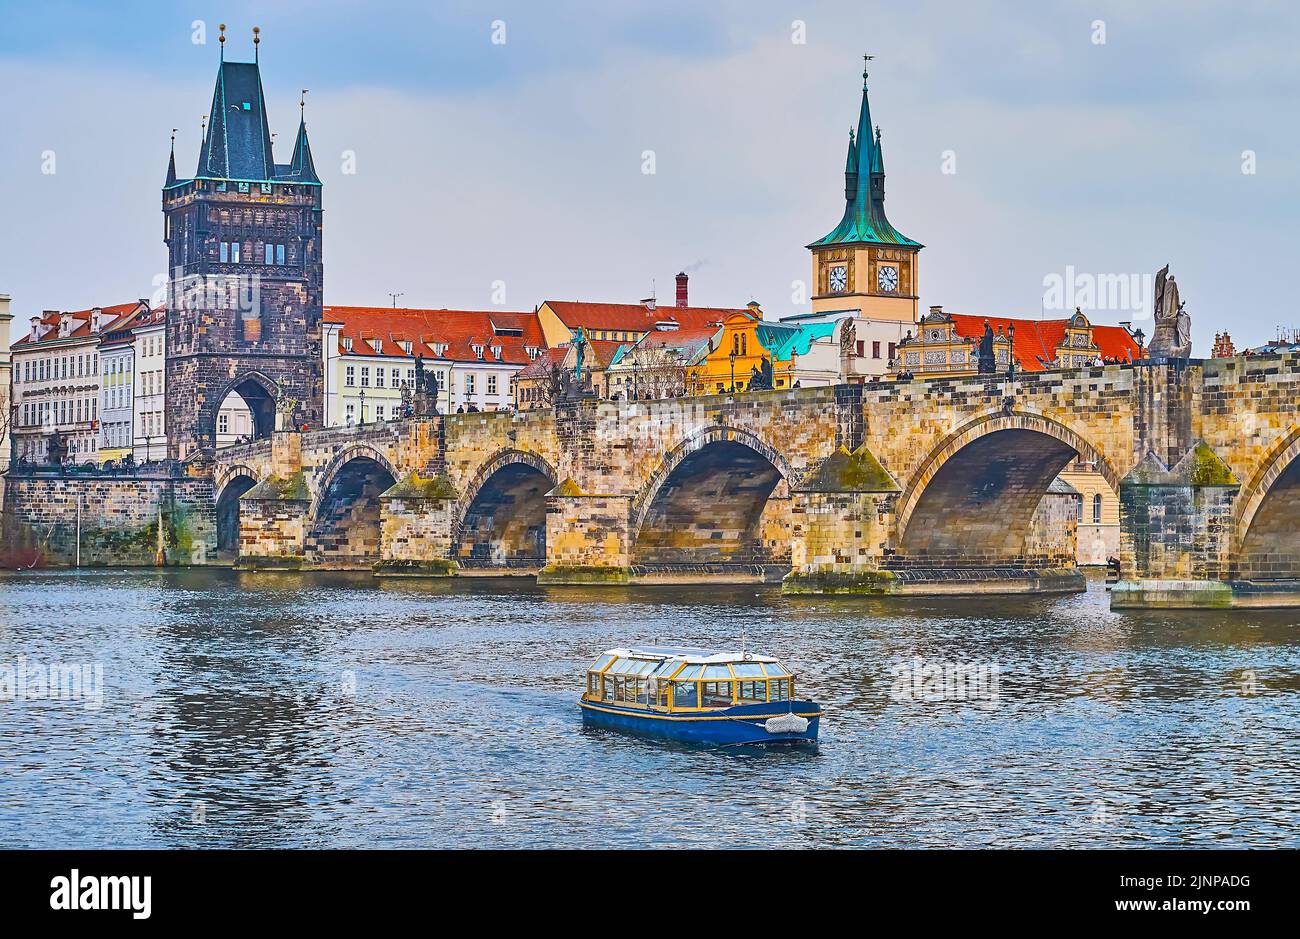 The cityscape of Prague with a boat on Vltava River, Charles Bridge with Gothic Old Town Bridge Tower and Old Town Water Tower with clock in backgroun Stock Photo